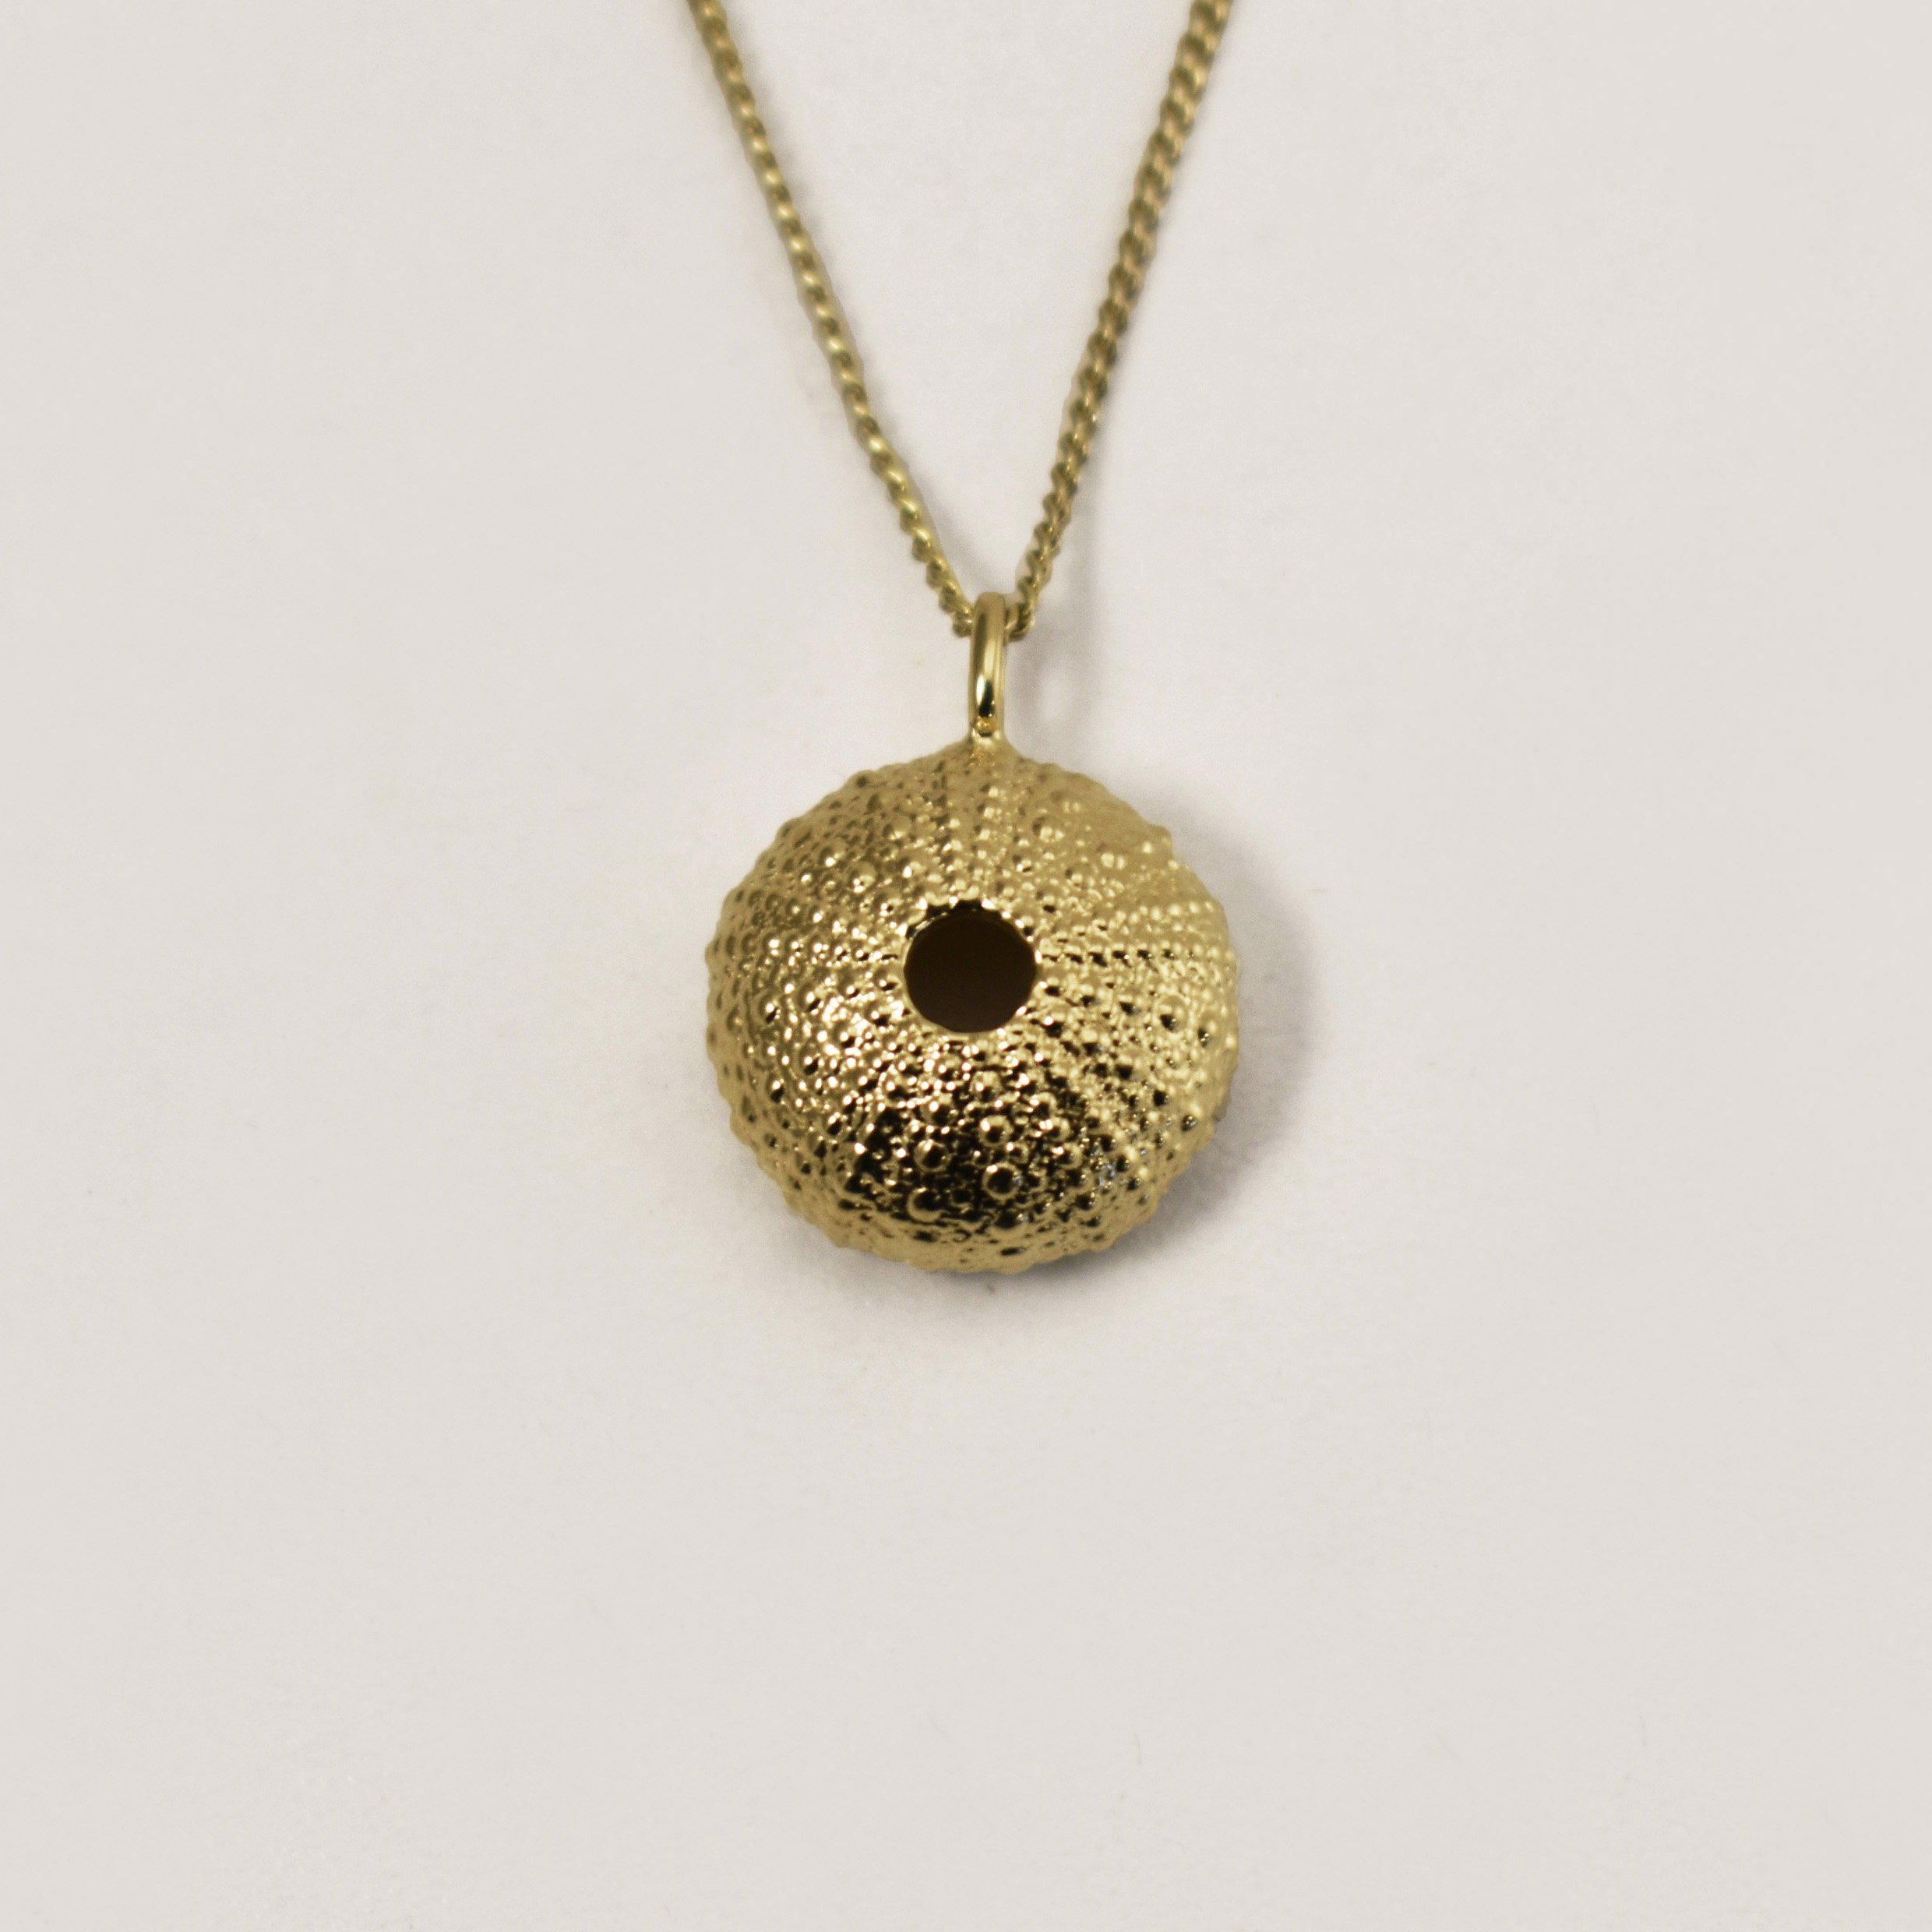 Gold Sea Urchin Necklaces (9ct Gold)